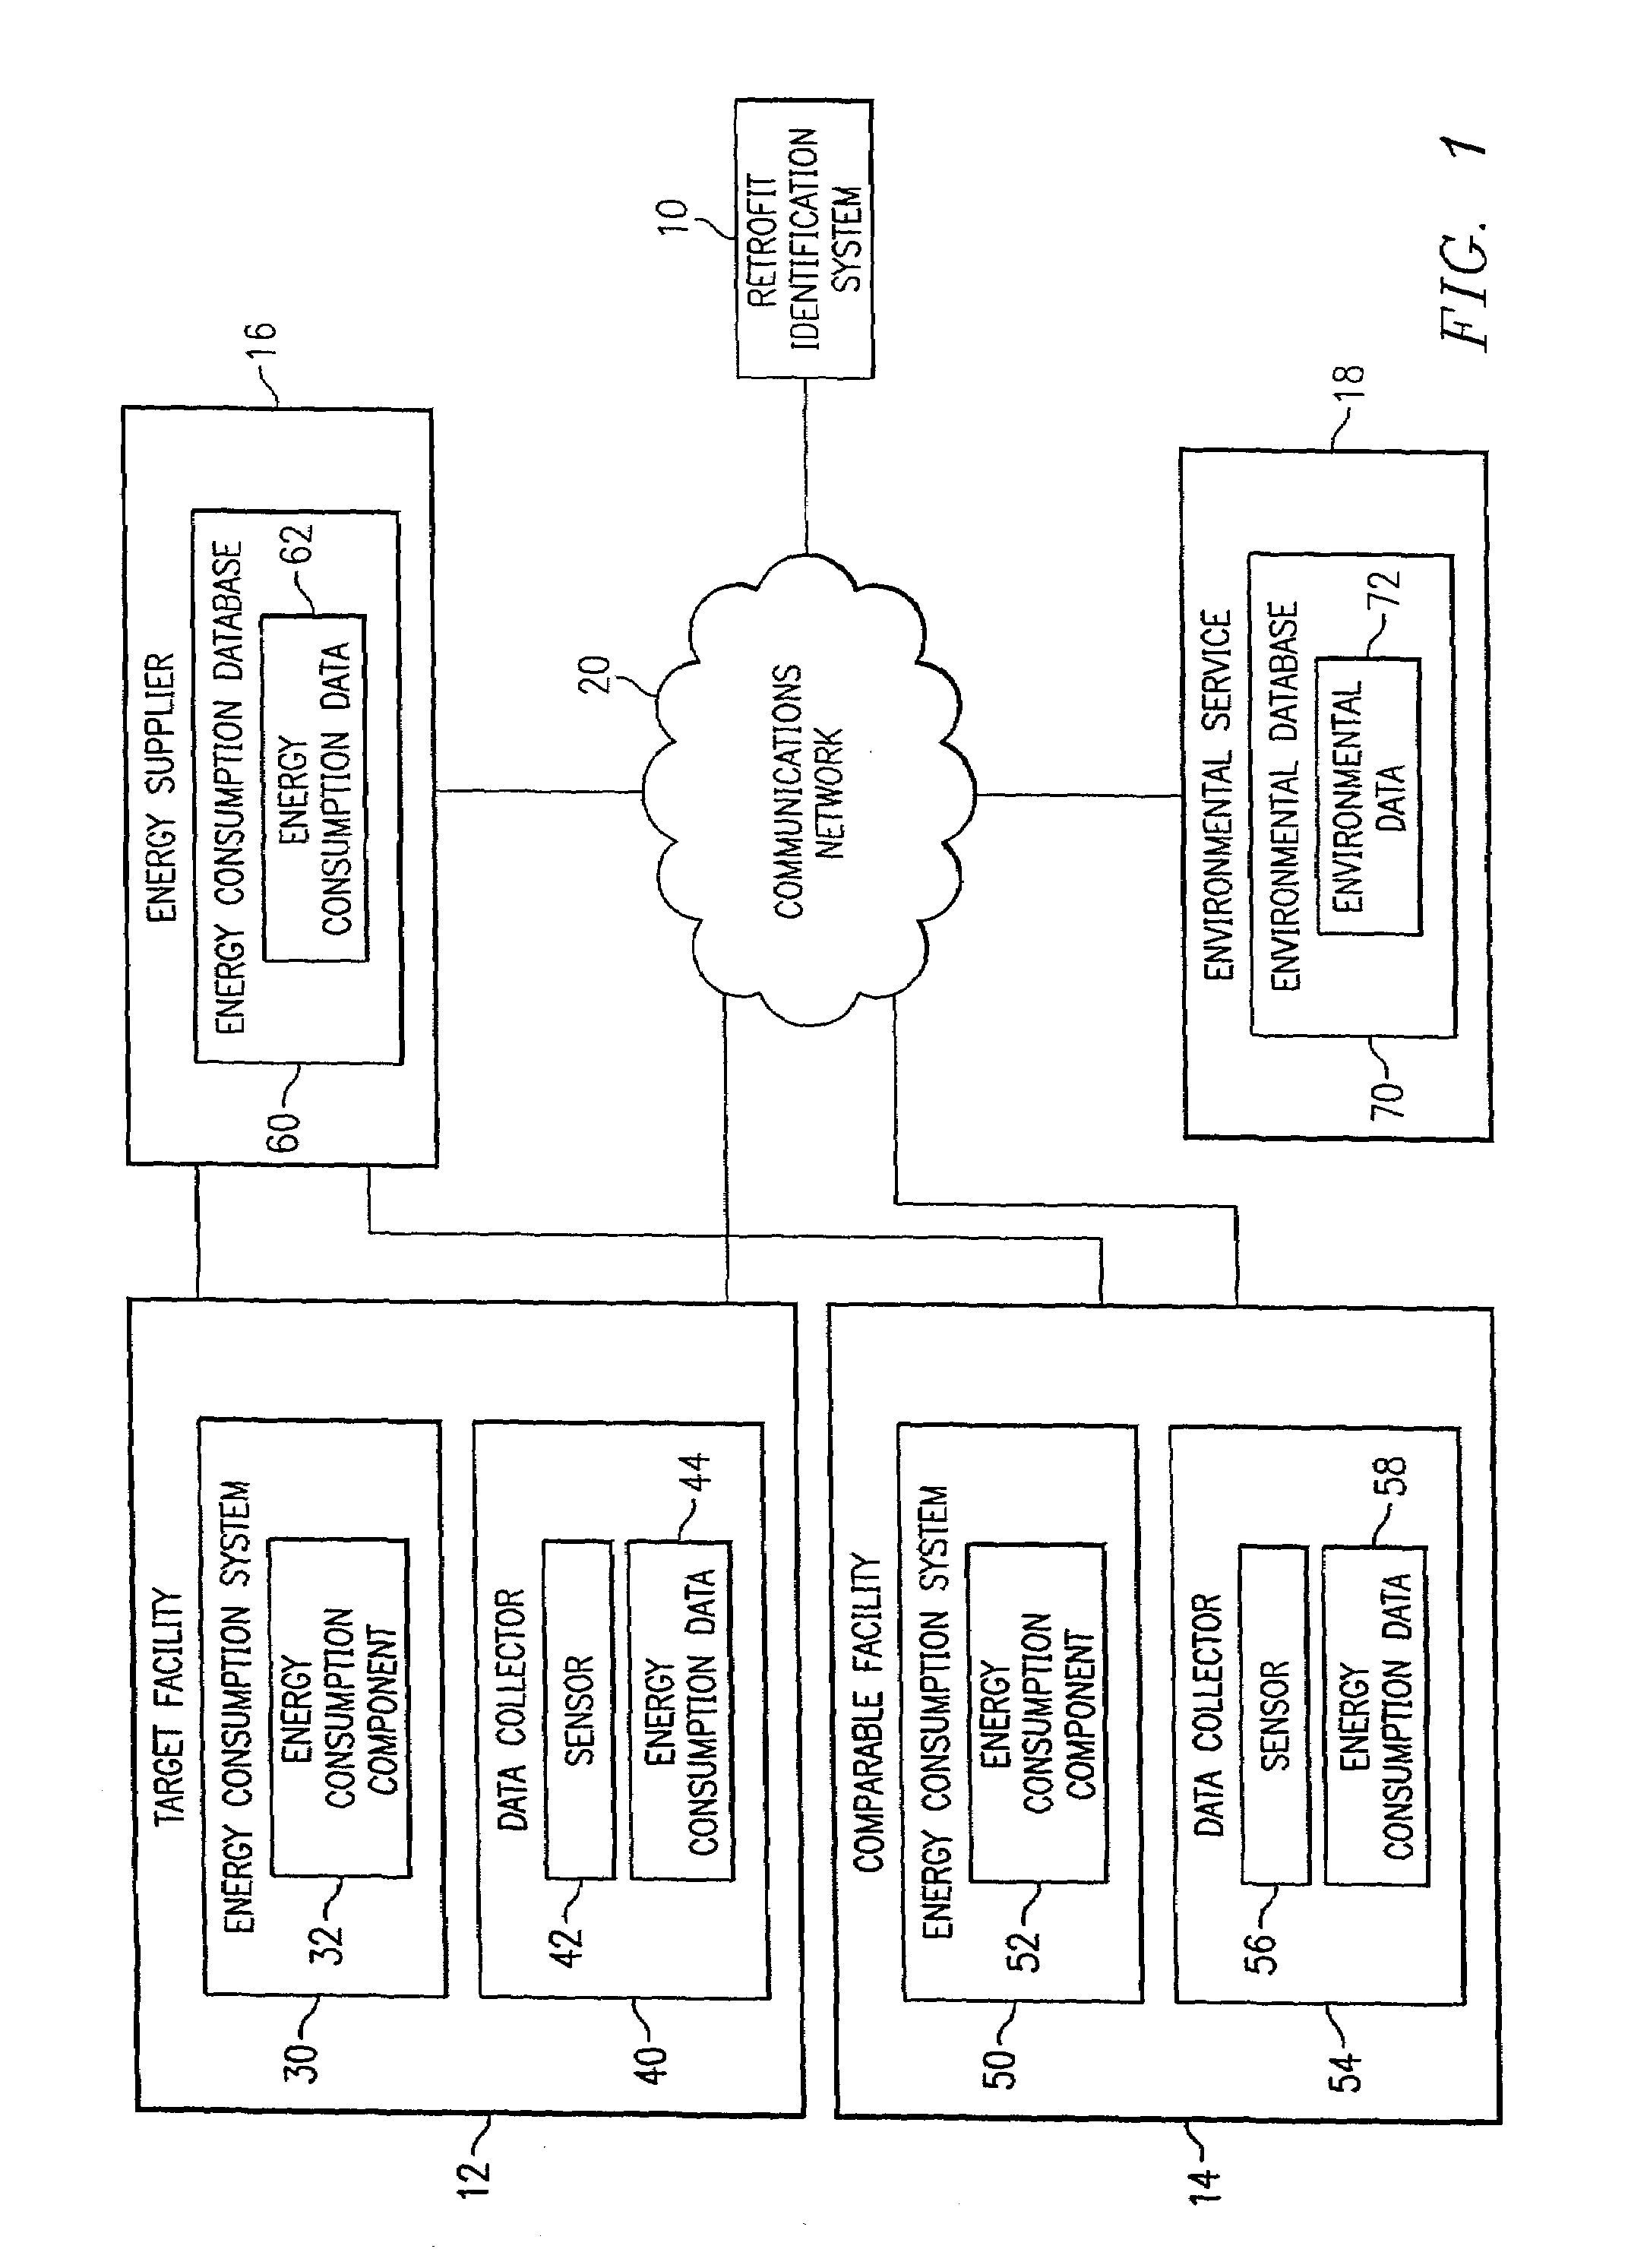 System and method for remote retrofit identification of energy consumption systems and components